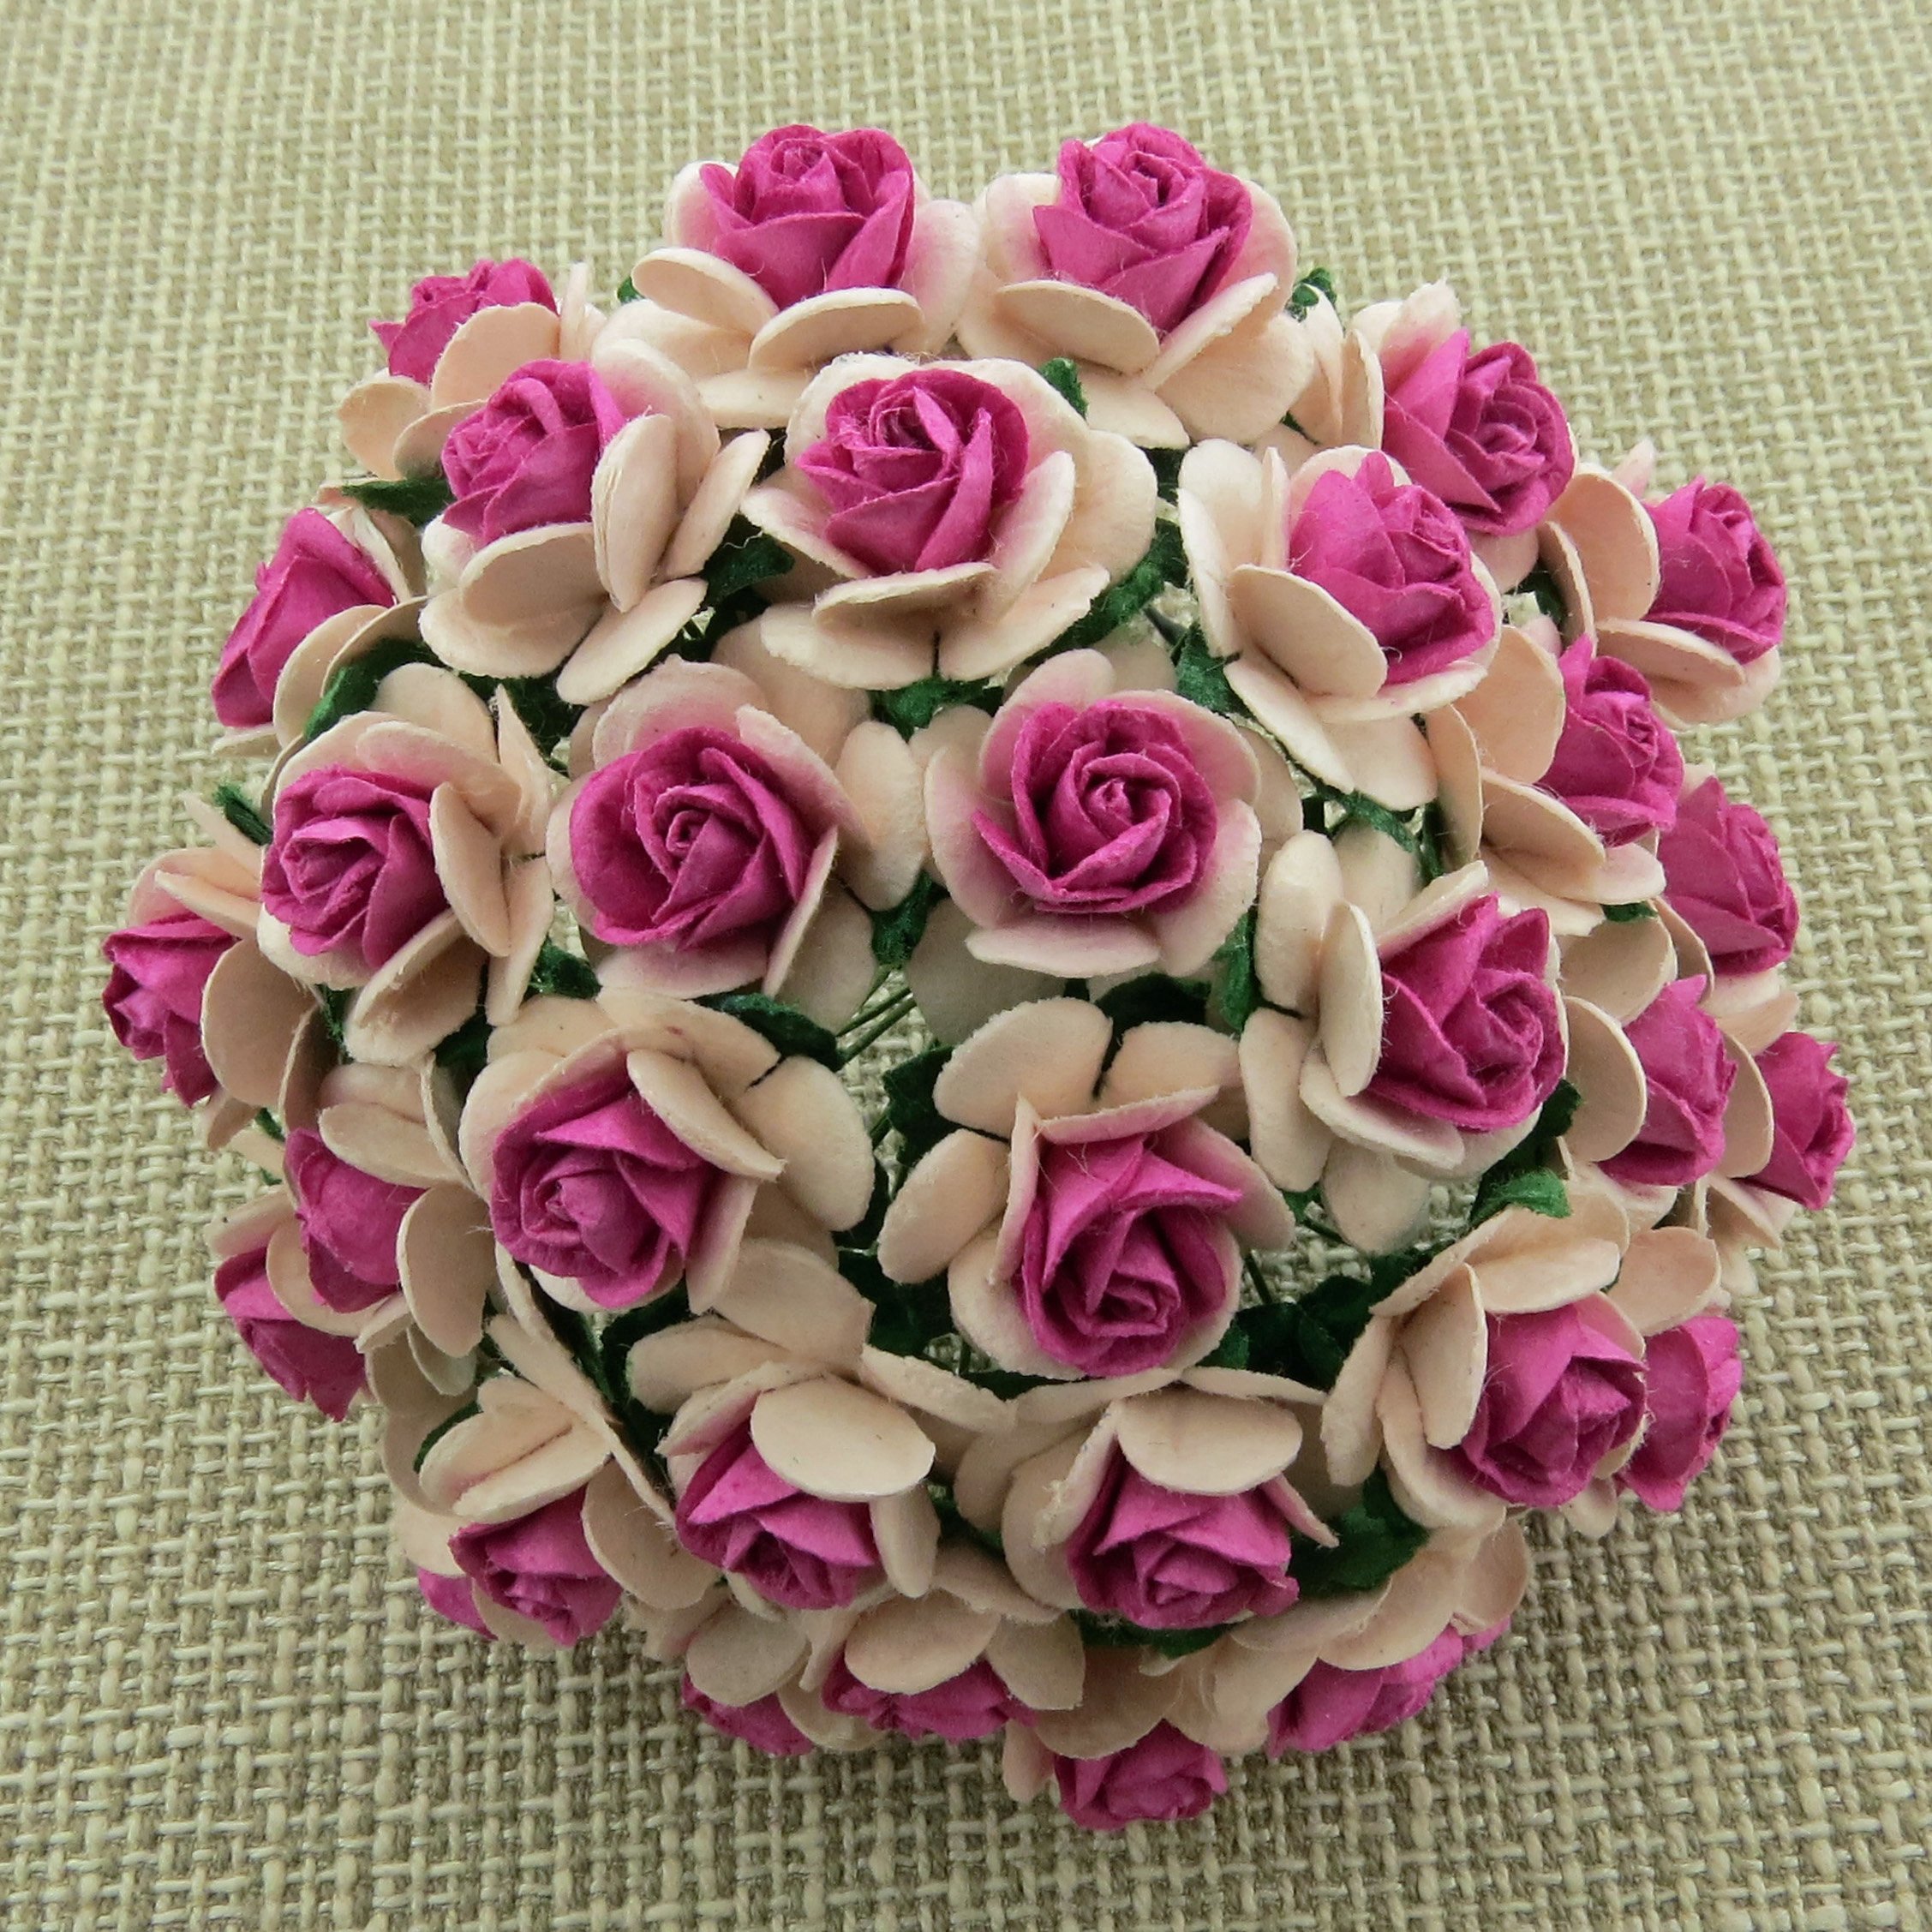 100 2-TONE PINK WITH DEEP CENTRE PINK MULBERRY PAPER OPEN ROSES